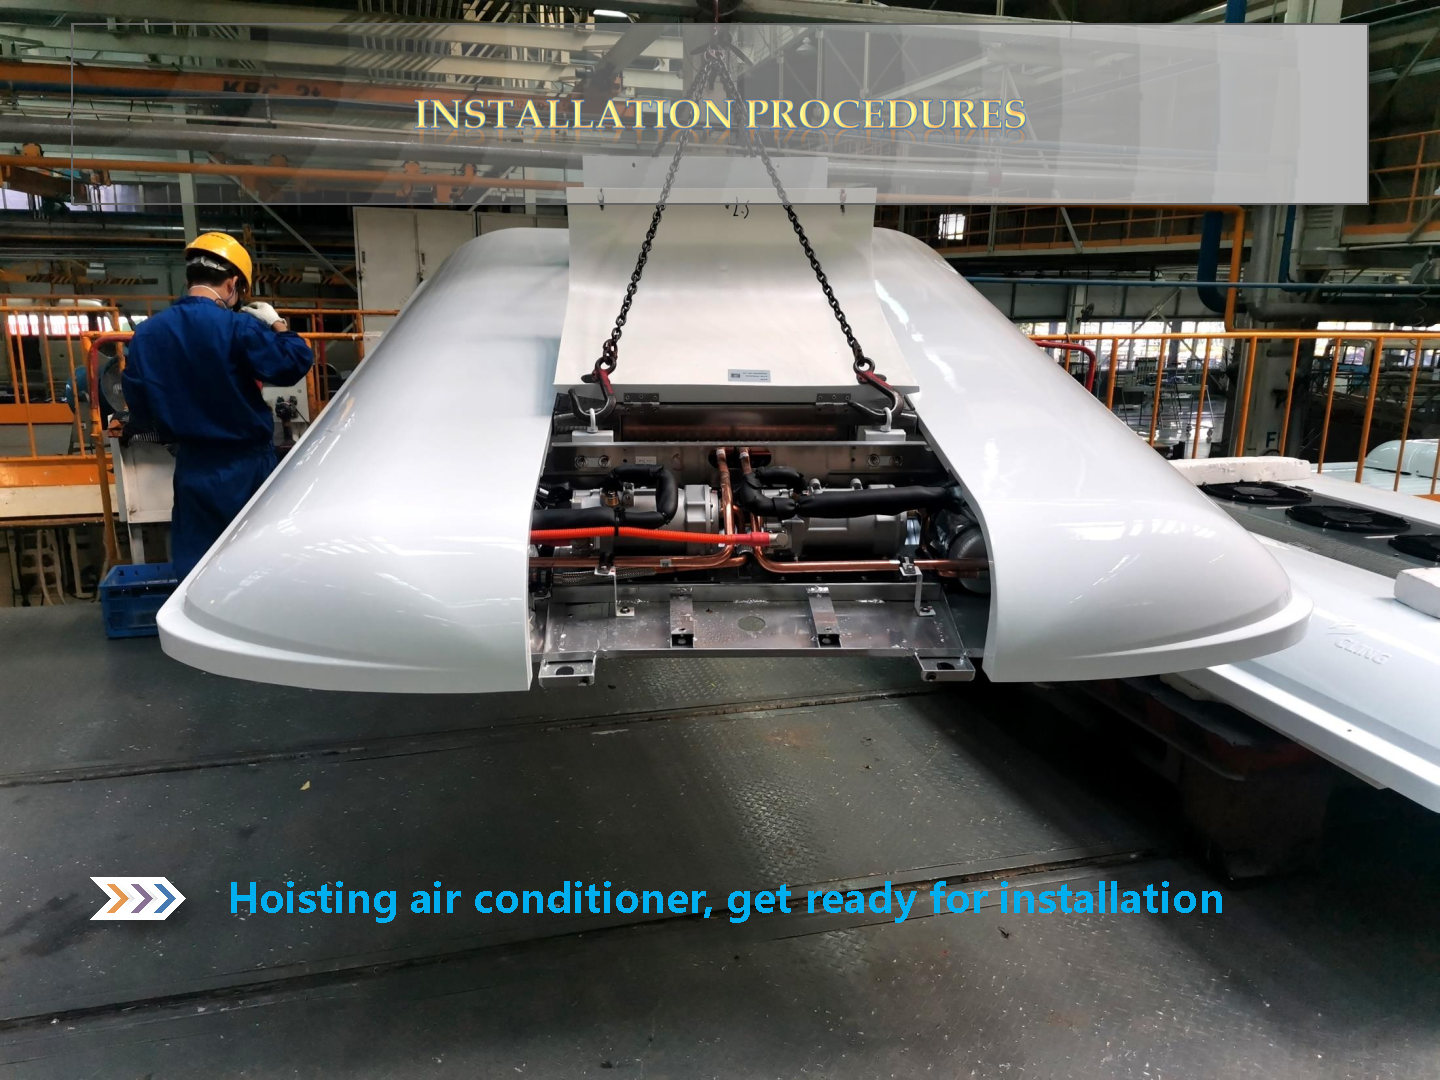 How to install electric bus air conditioner cling